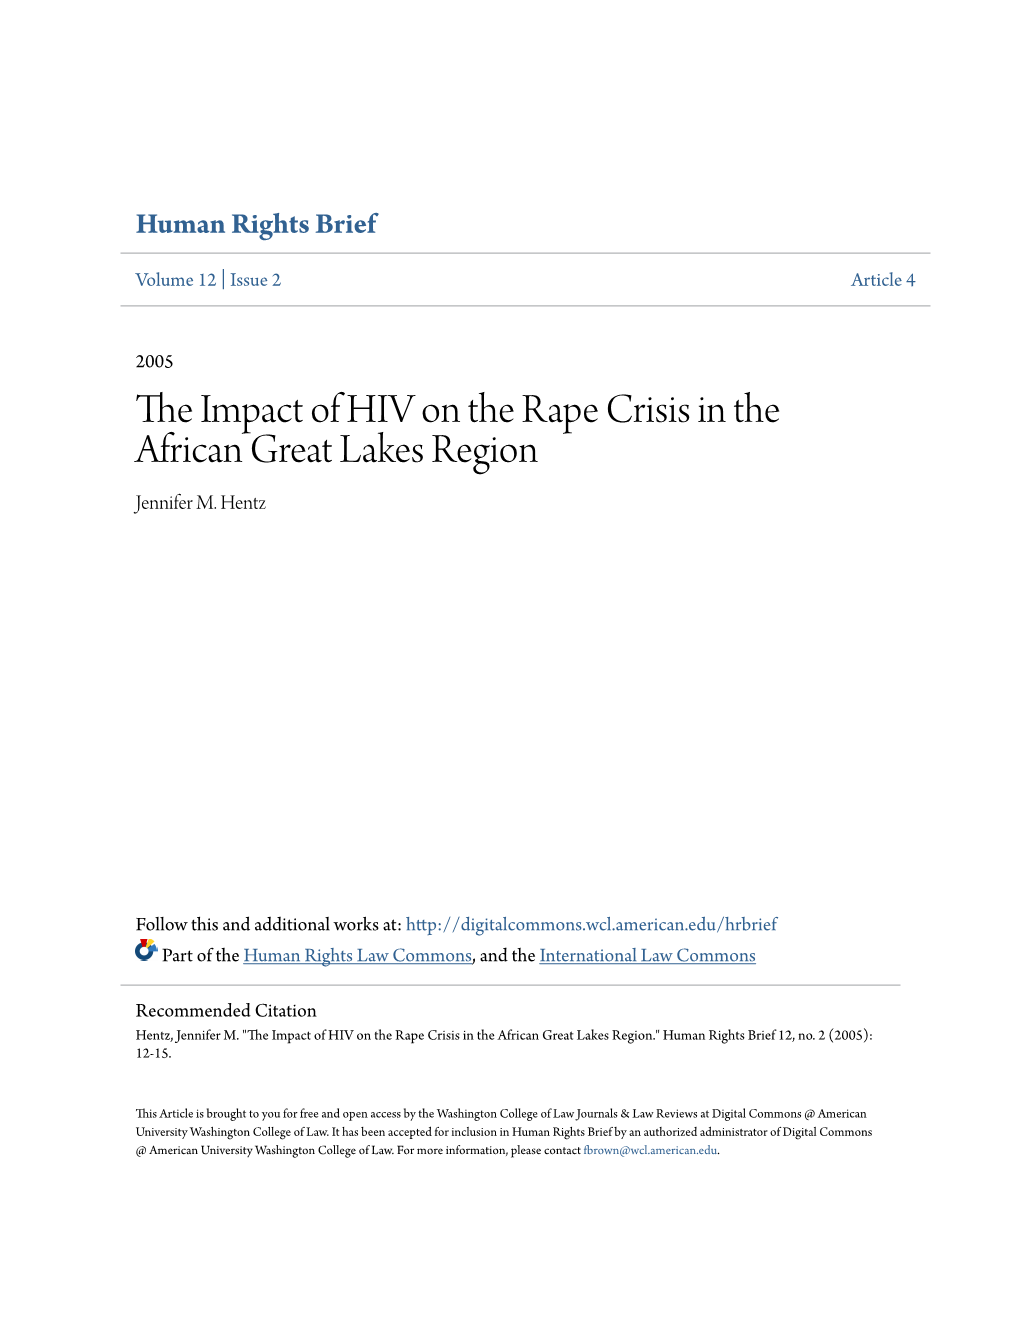 The Impact of HIV on the Rape Crisis in the African Great Lakes Region by Jennifer M